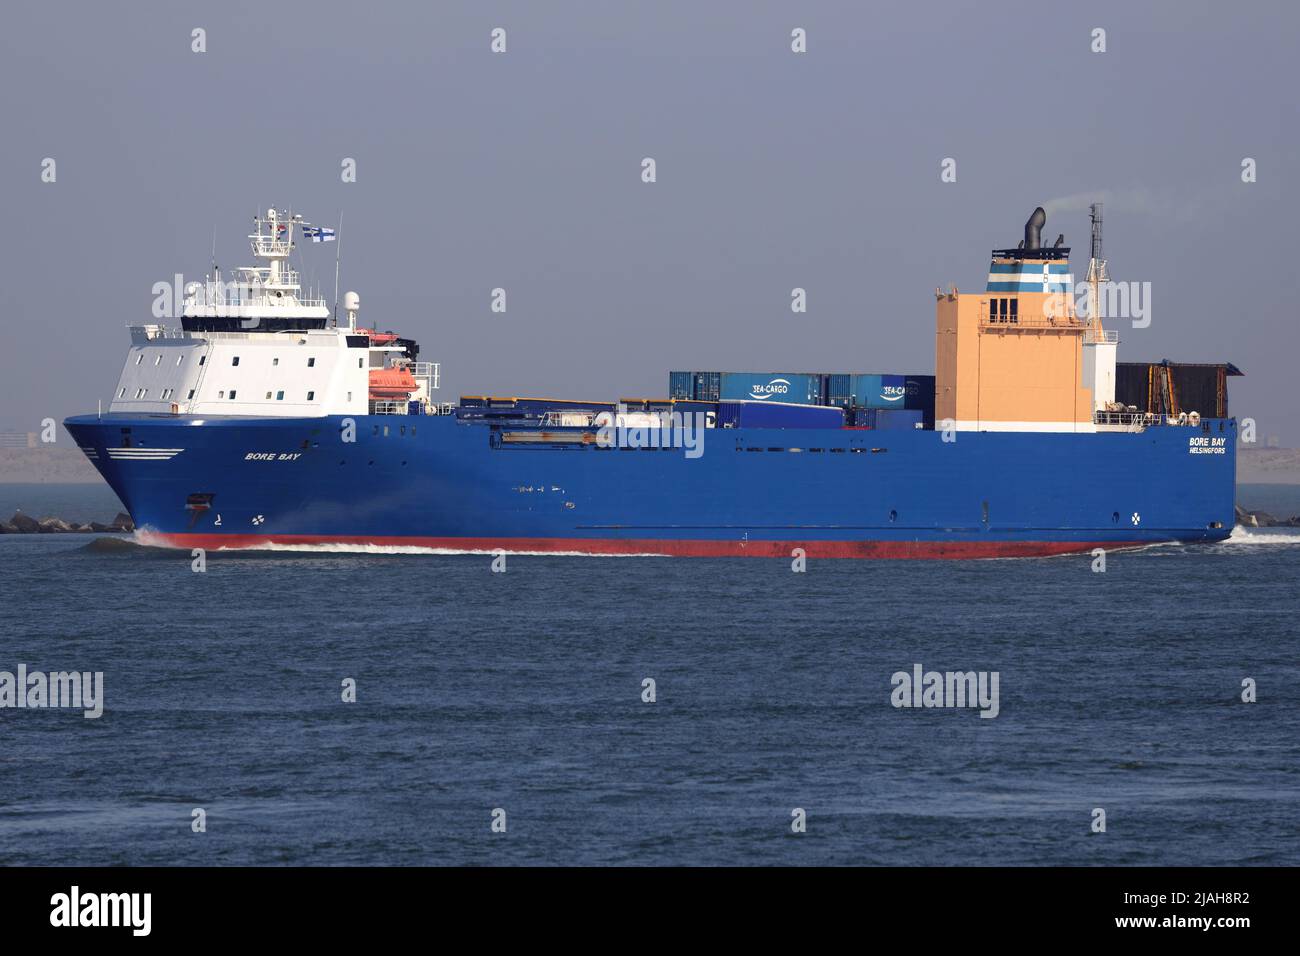 The ro-ro cargo ship Bore Bay departs the port of Rotterdam on March 18, 2022. Stock Photo